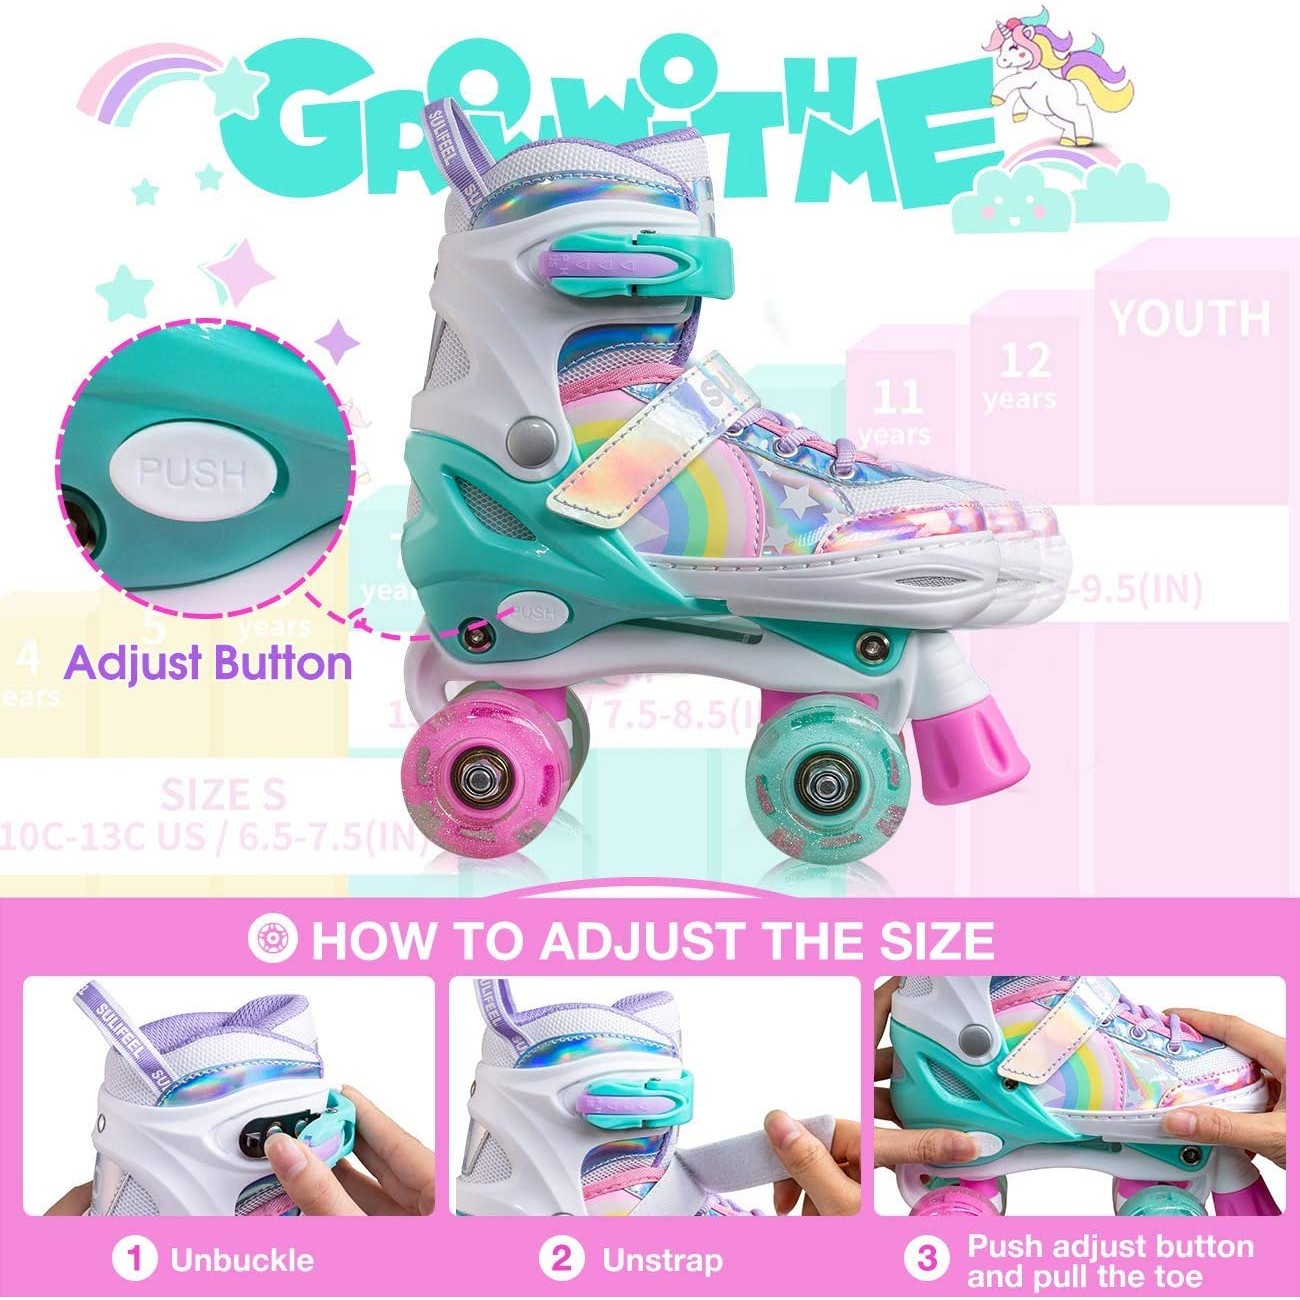 Instructions on how to adjust the size on a pair of kids rainbow unicorn roller skates.